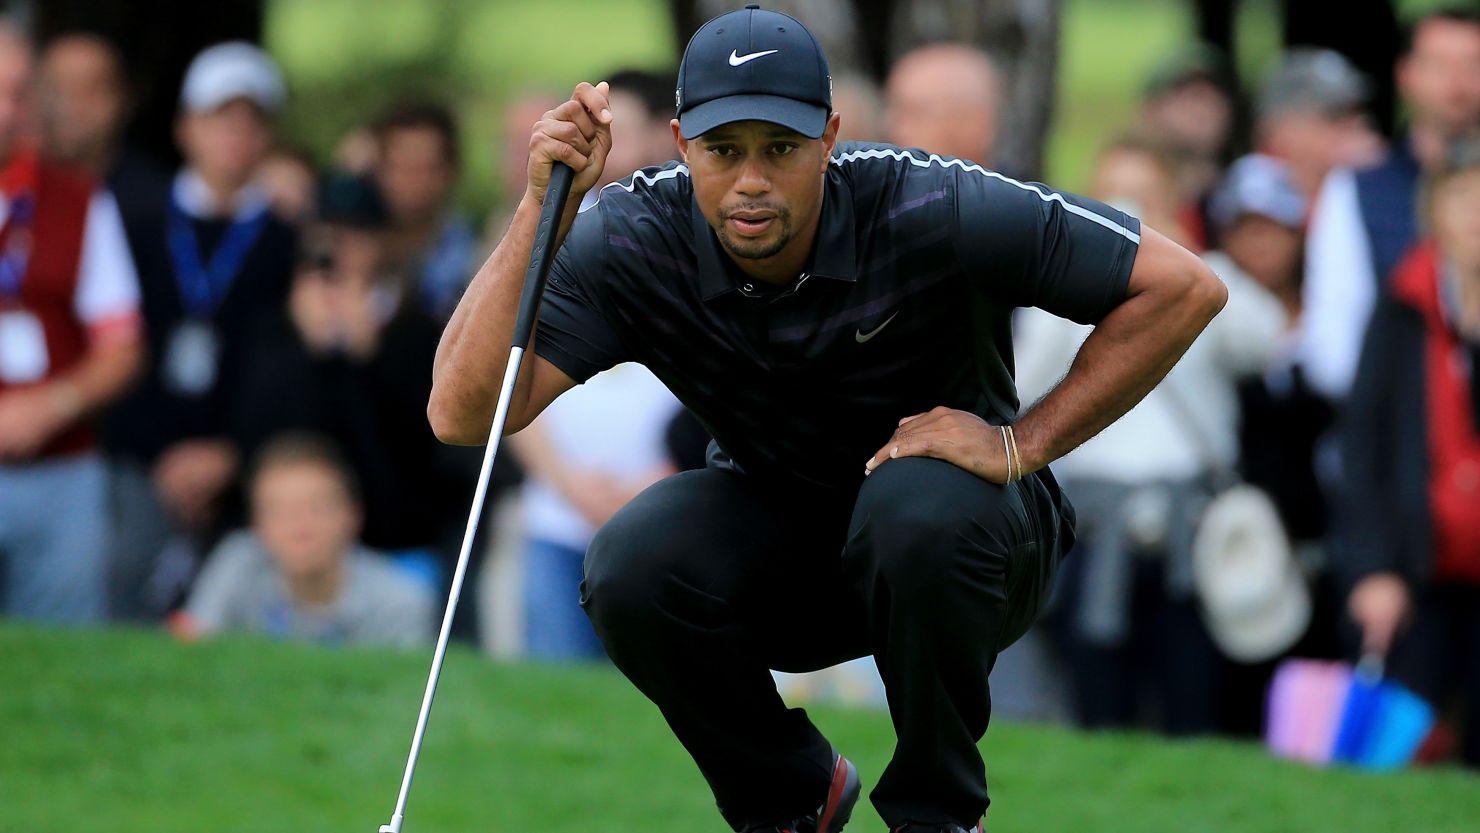 Tiger Woods was thwarted by adverse weather conditions on the opening day of the Turkish Open.